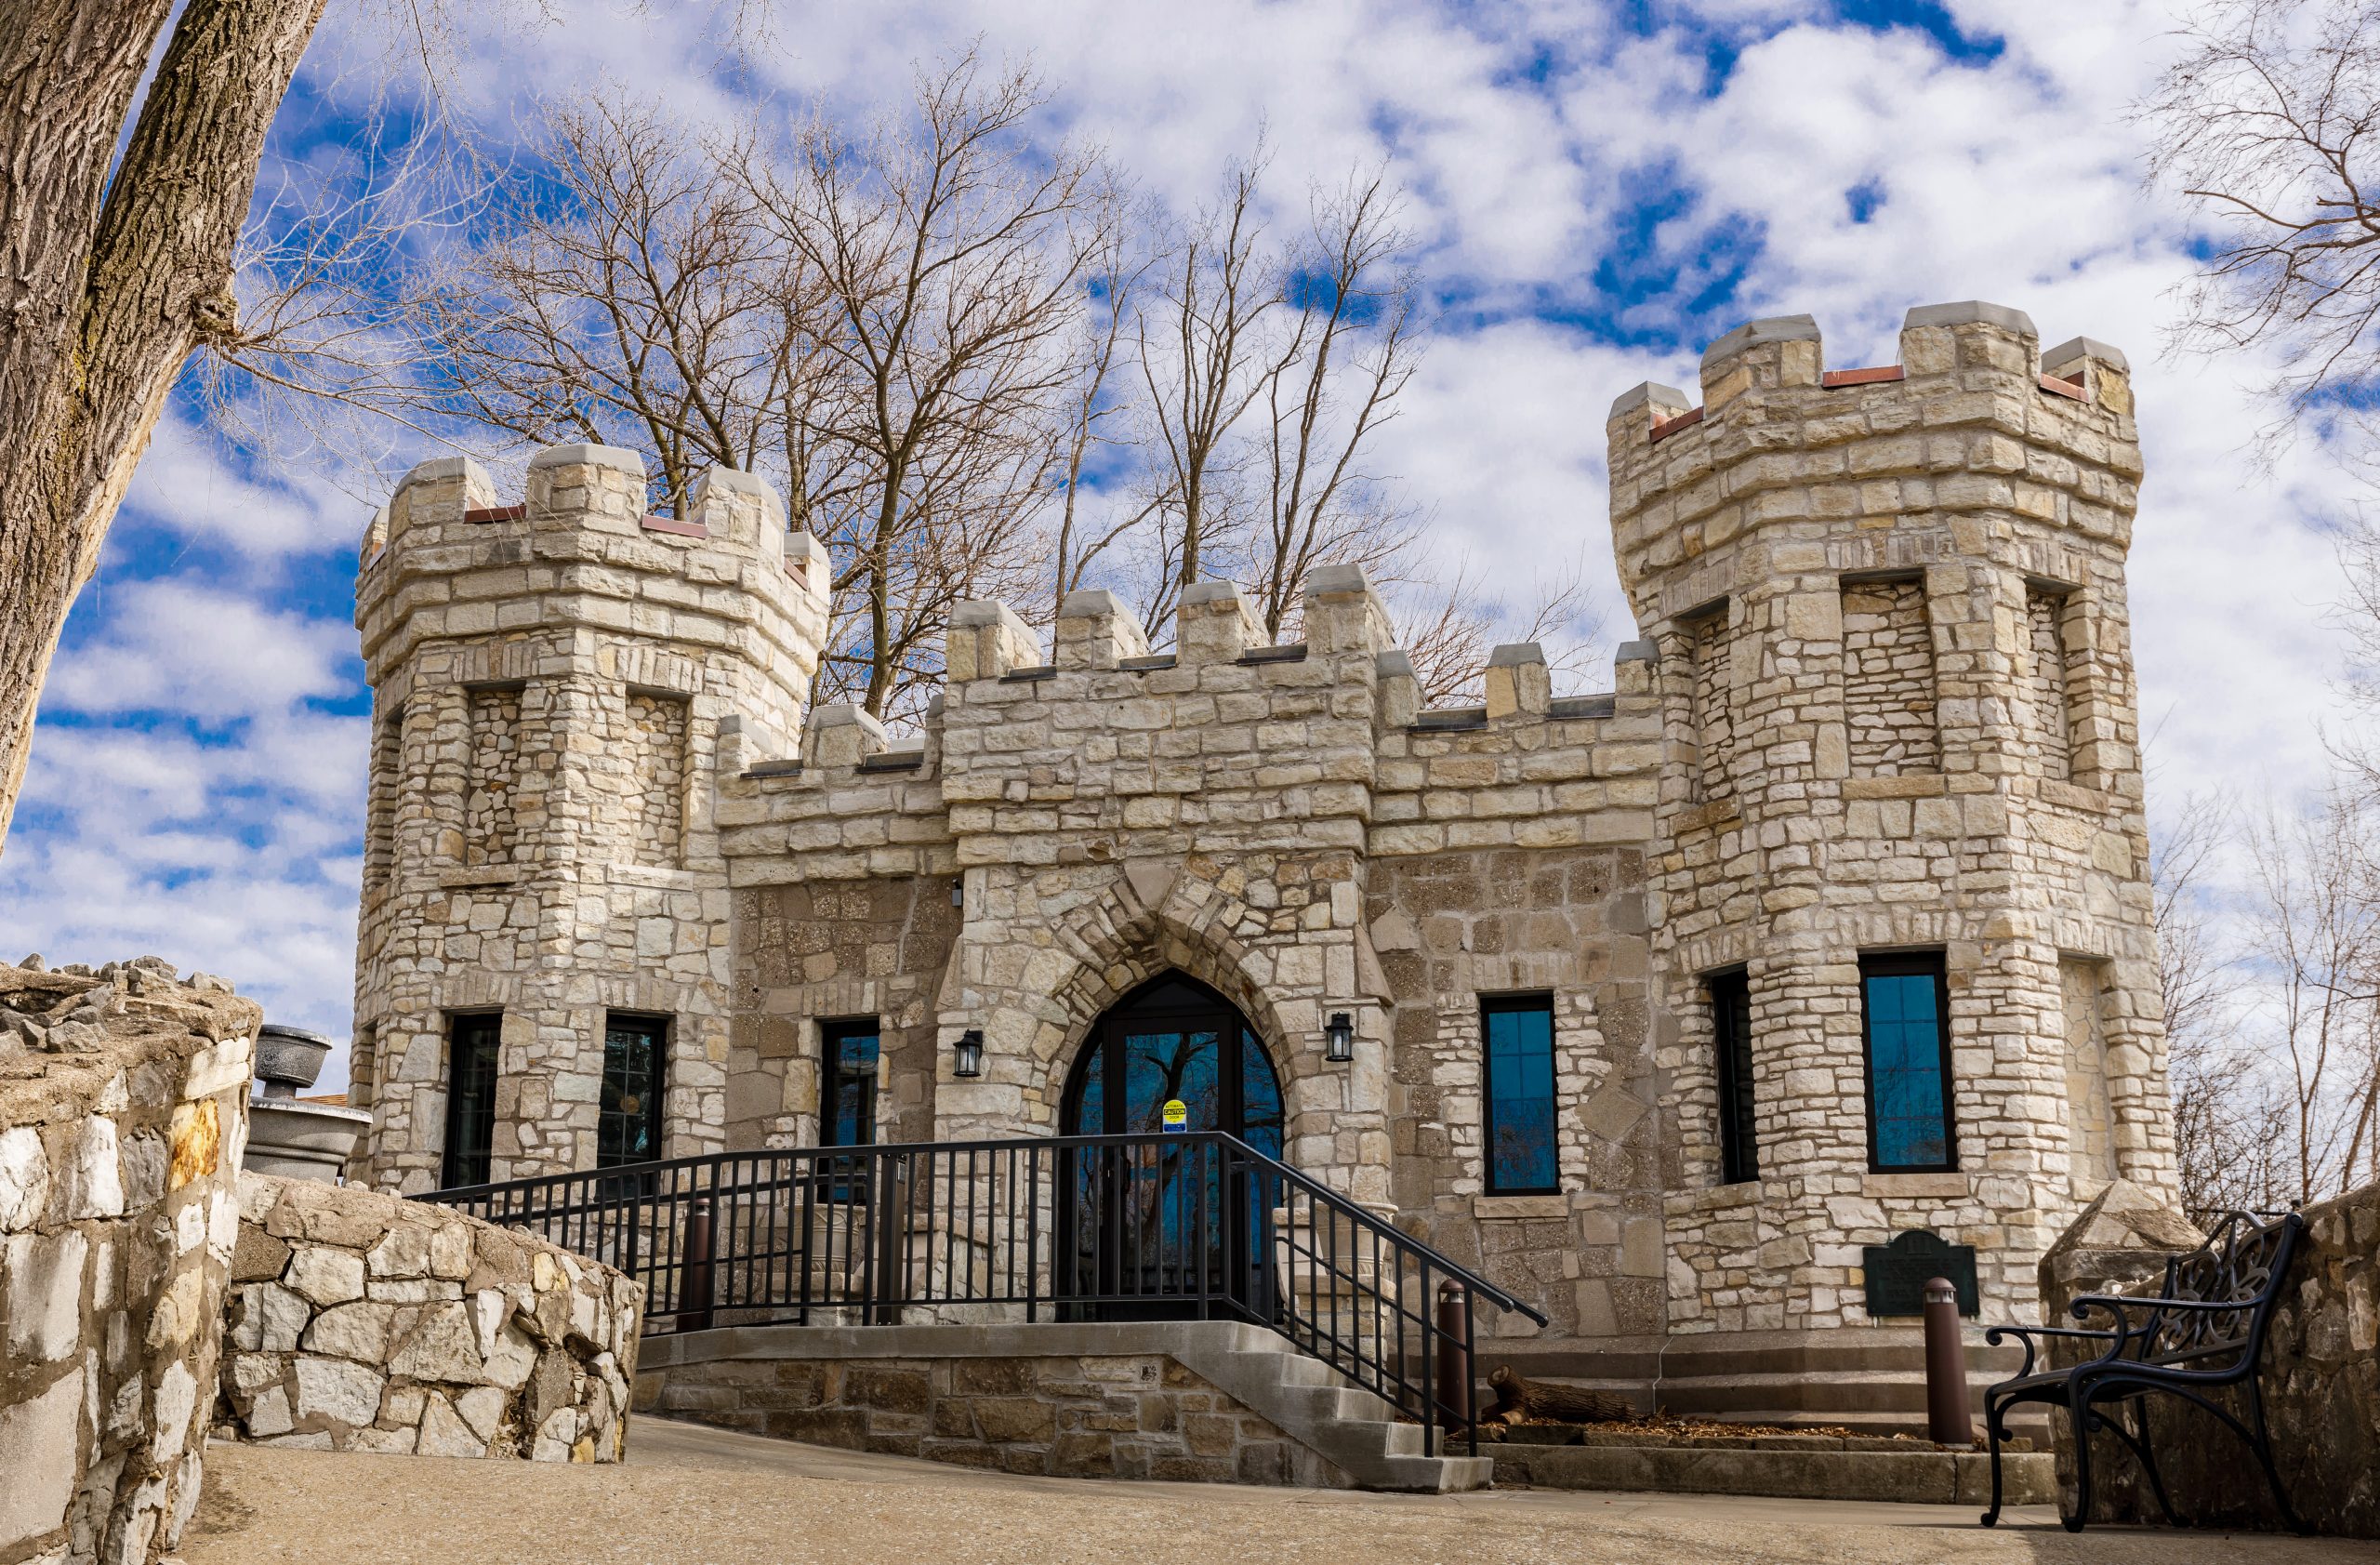 Castle-shaped stone building at a zoo